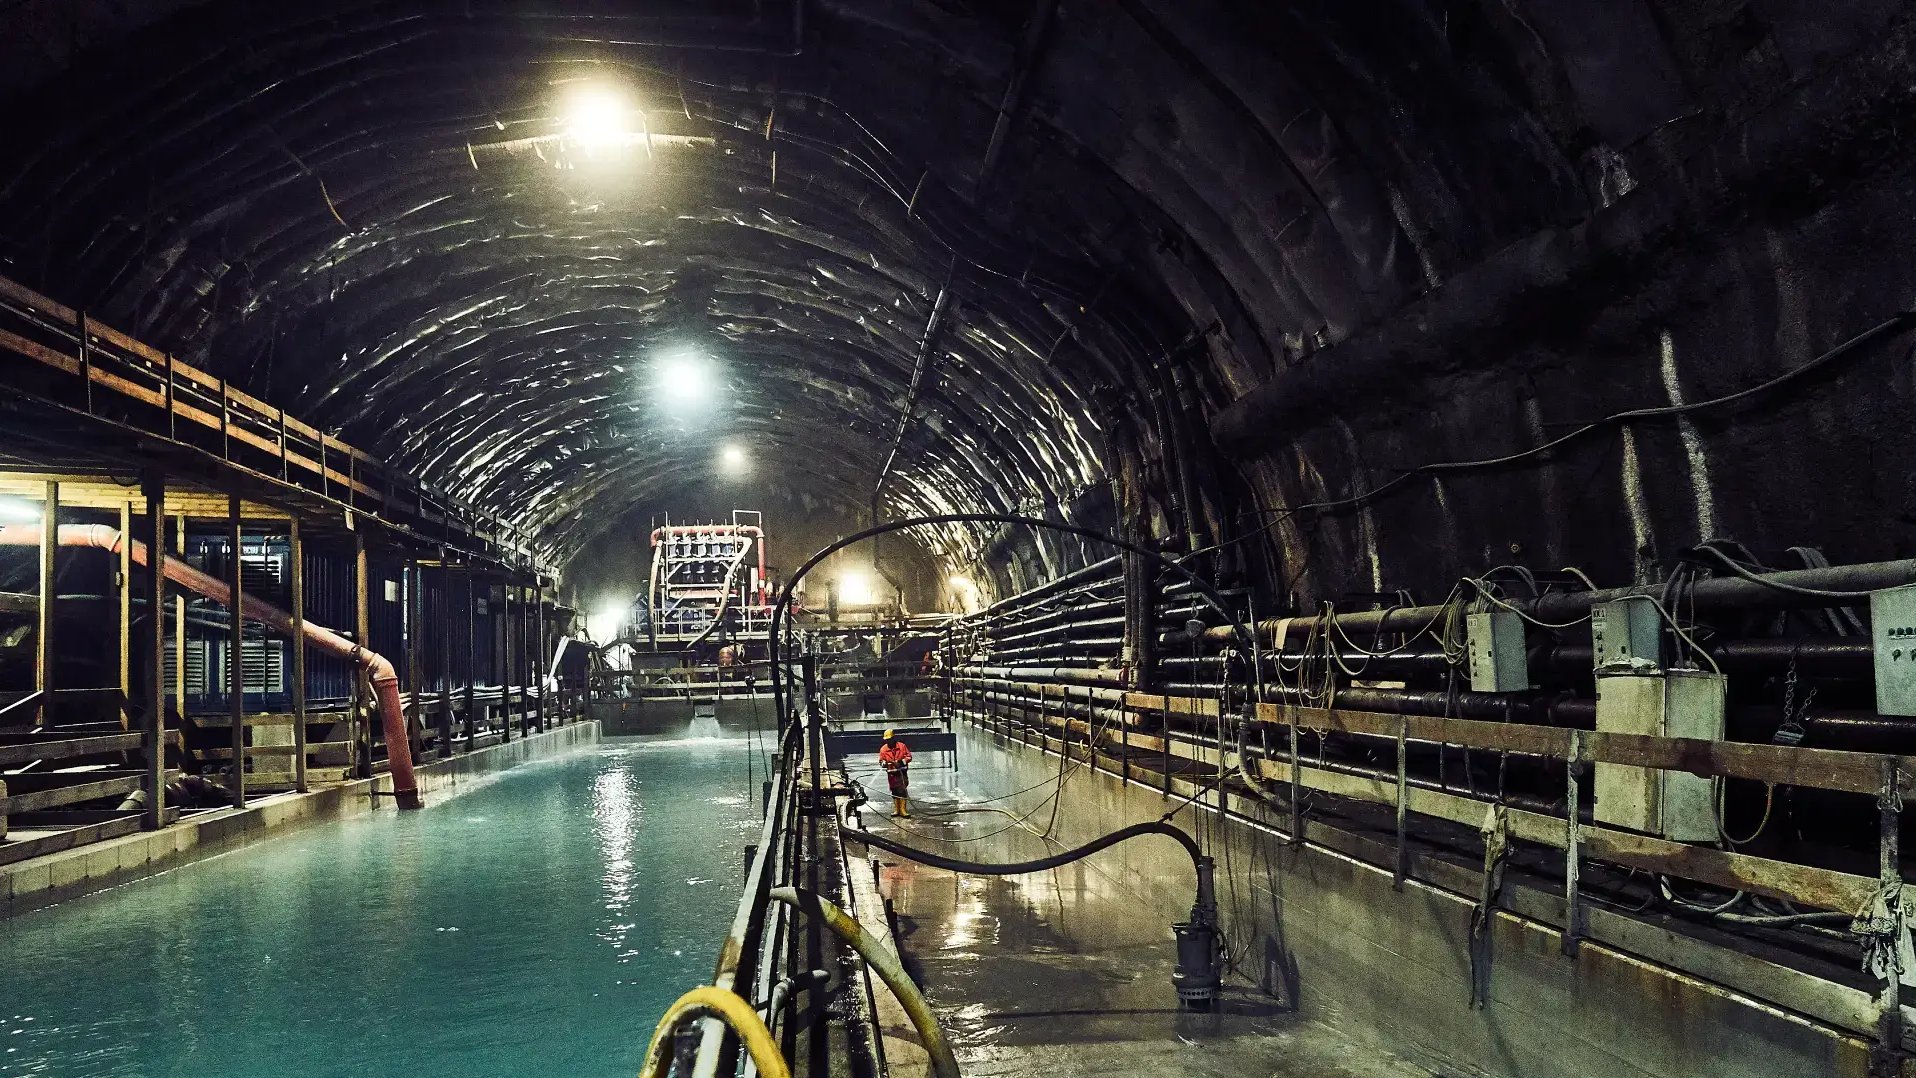 Difficult conditions in tunnel construction require innovations